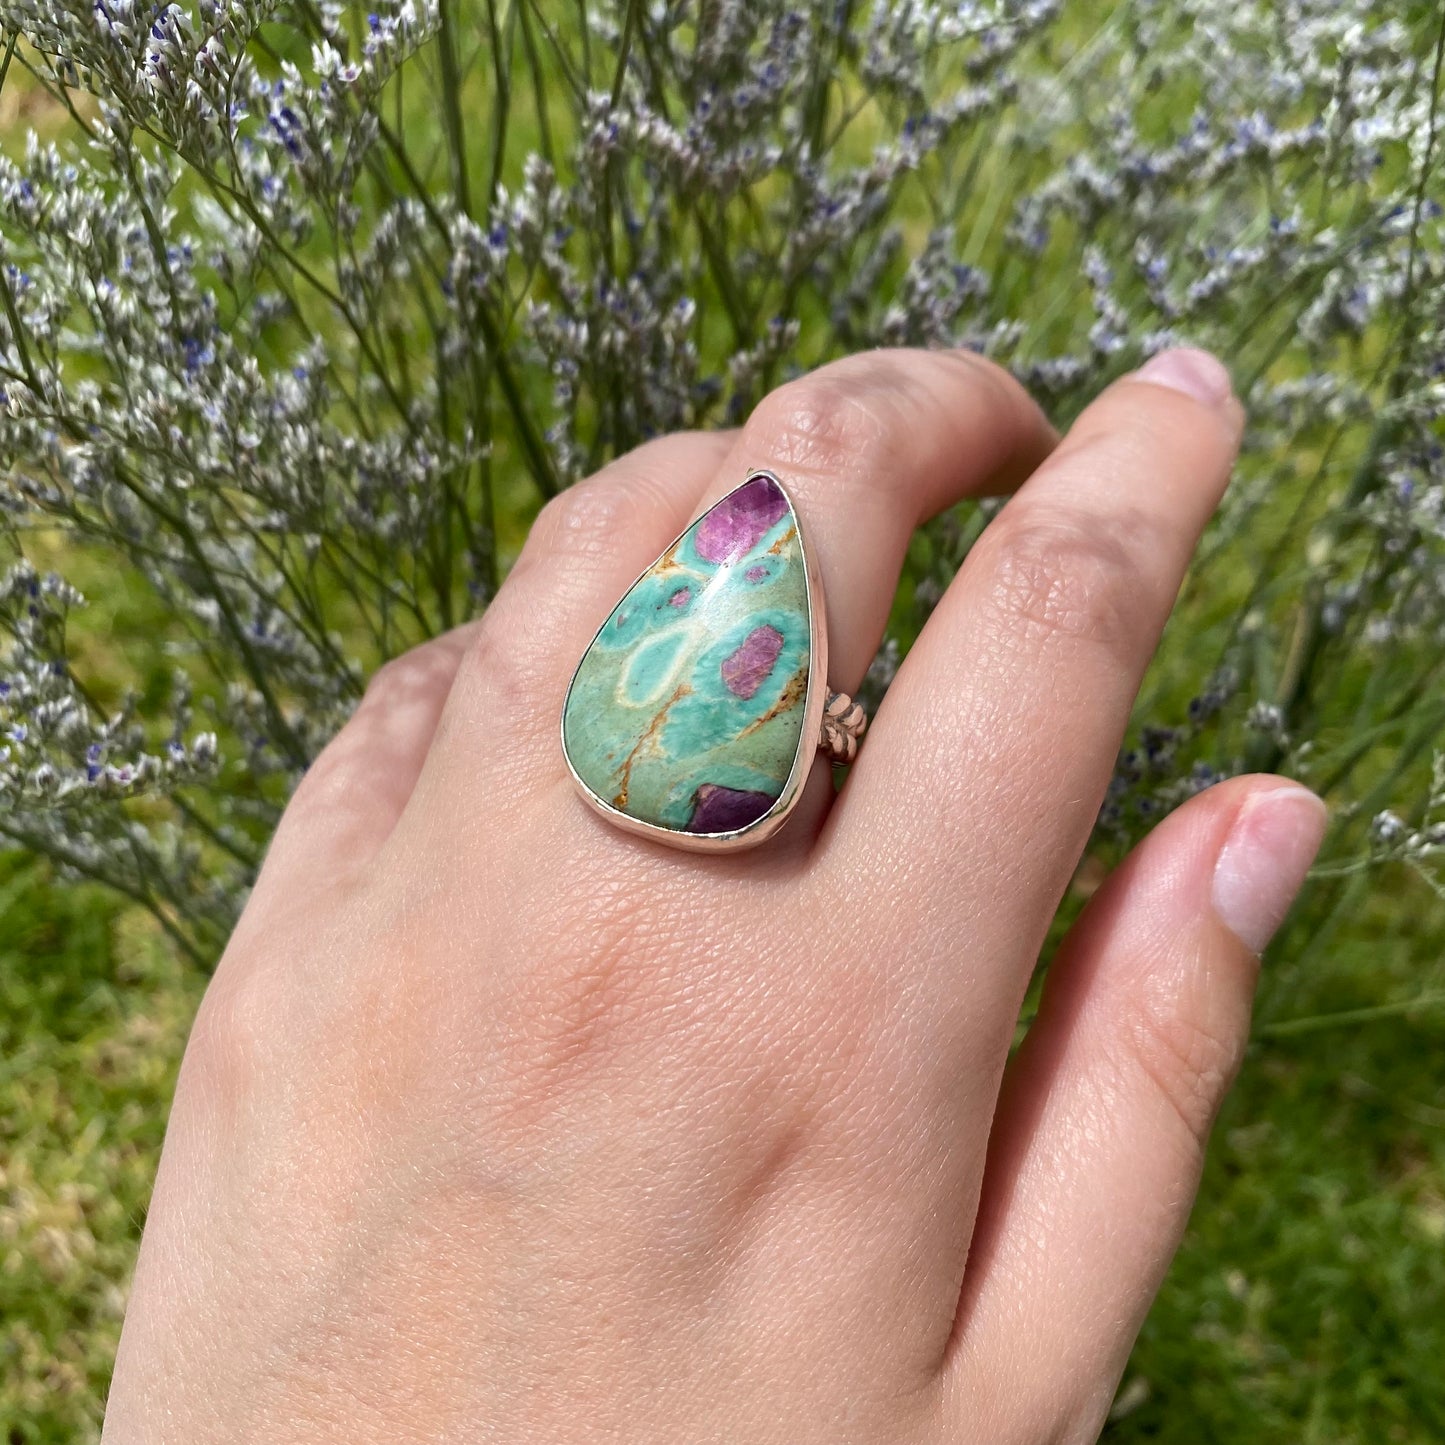 Ruby in Fuchsite Statement Ring